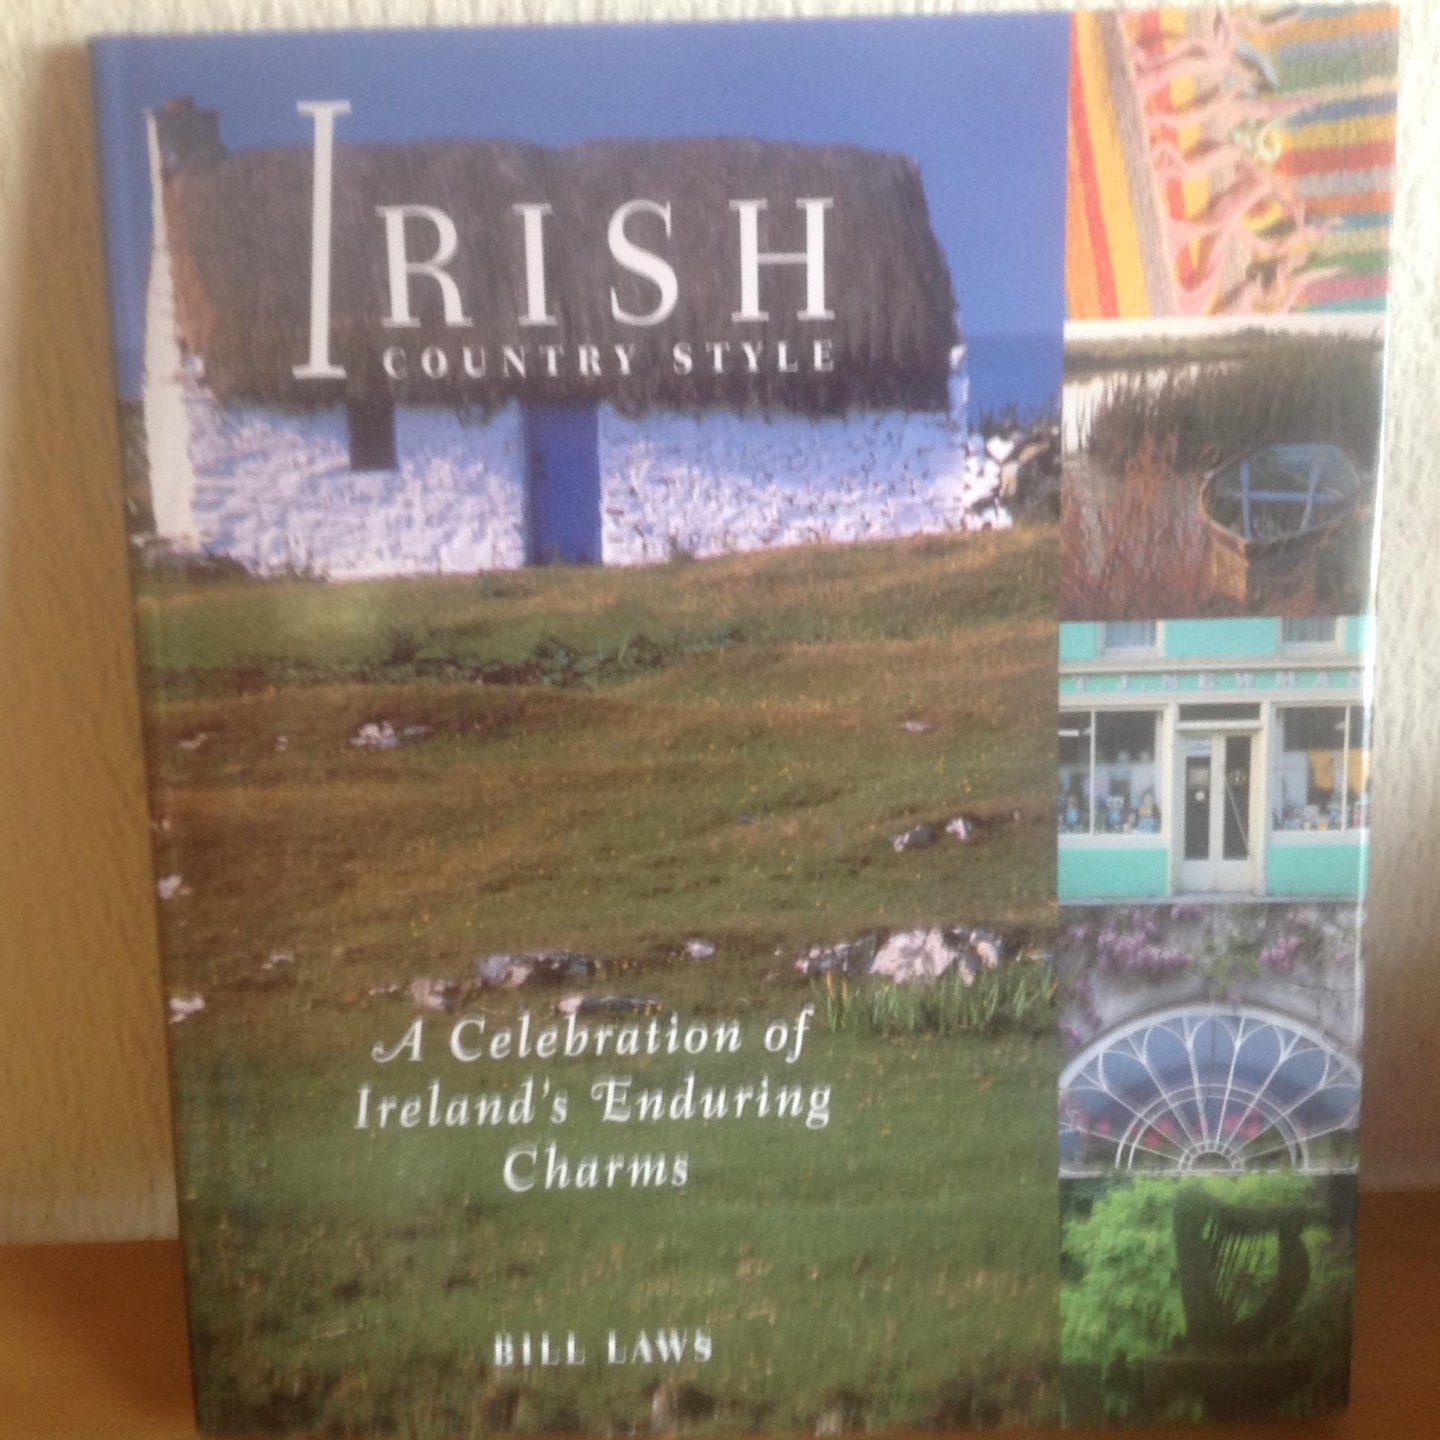 Laws, Bill - Irish Country Style / A Celebration of Ireland's Enduring Charms